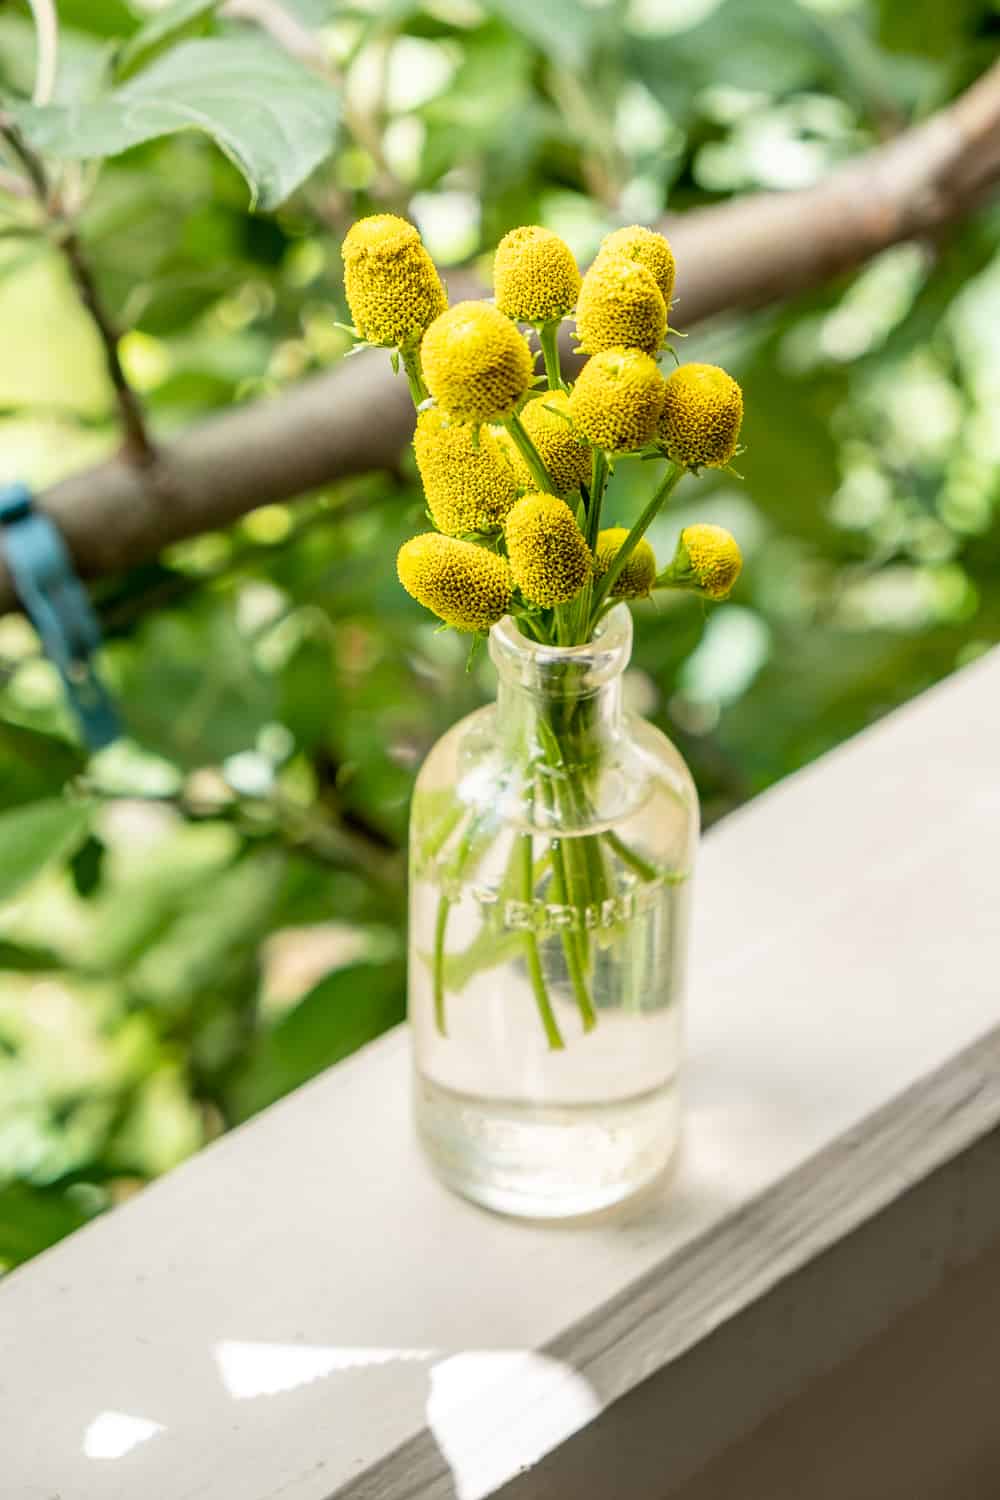 Yellow toothache plant flowers in a small antique Listerine glass jar.